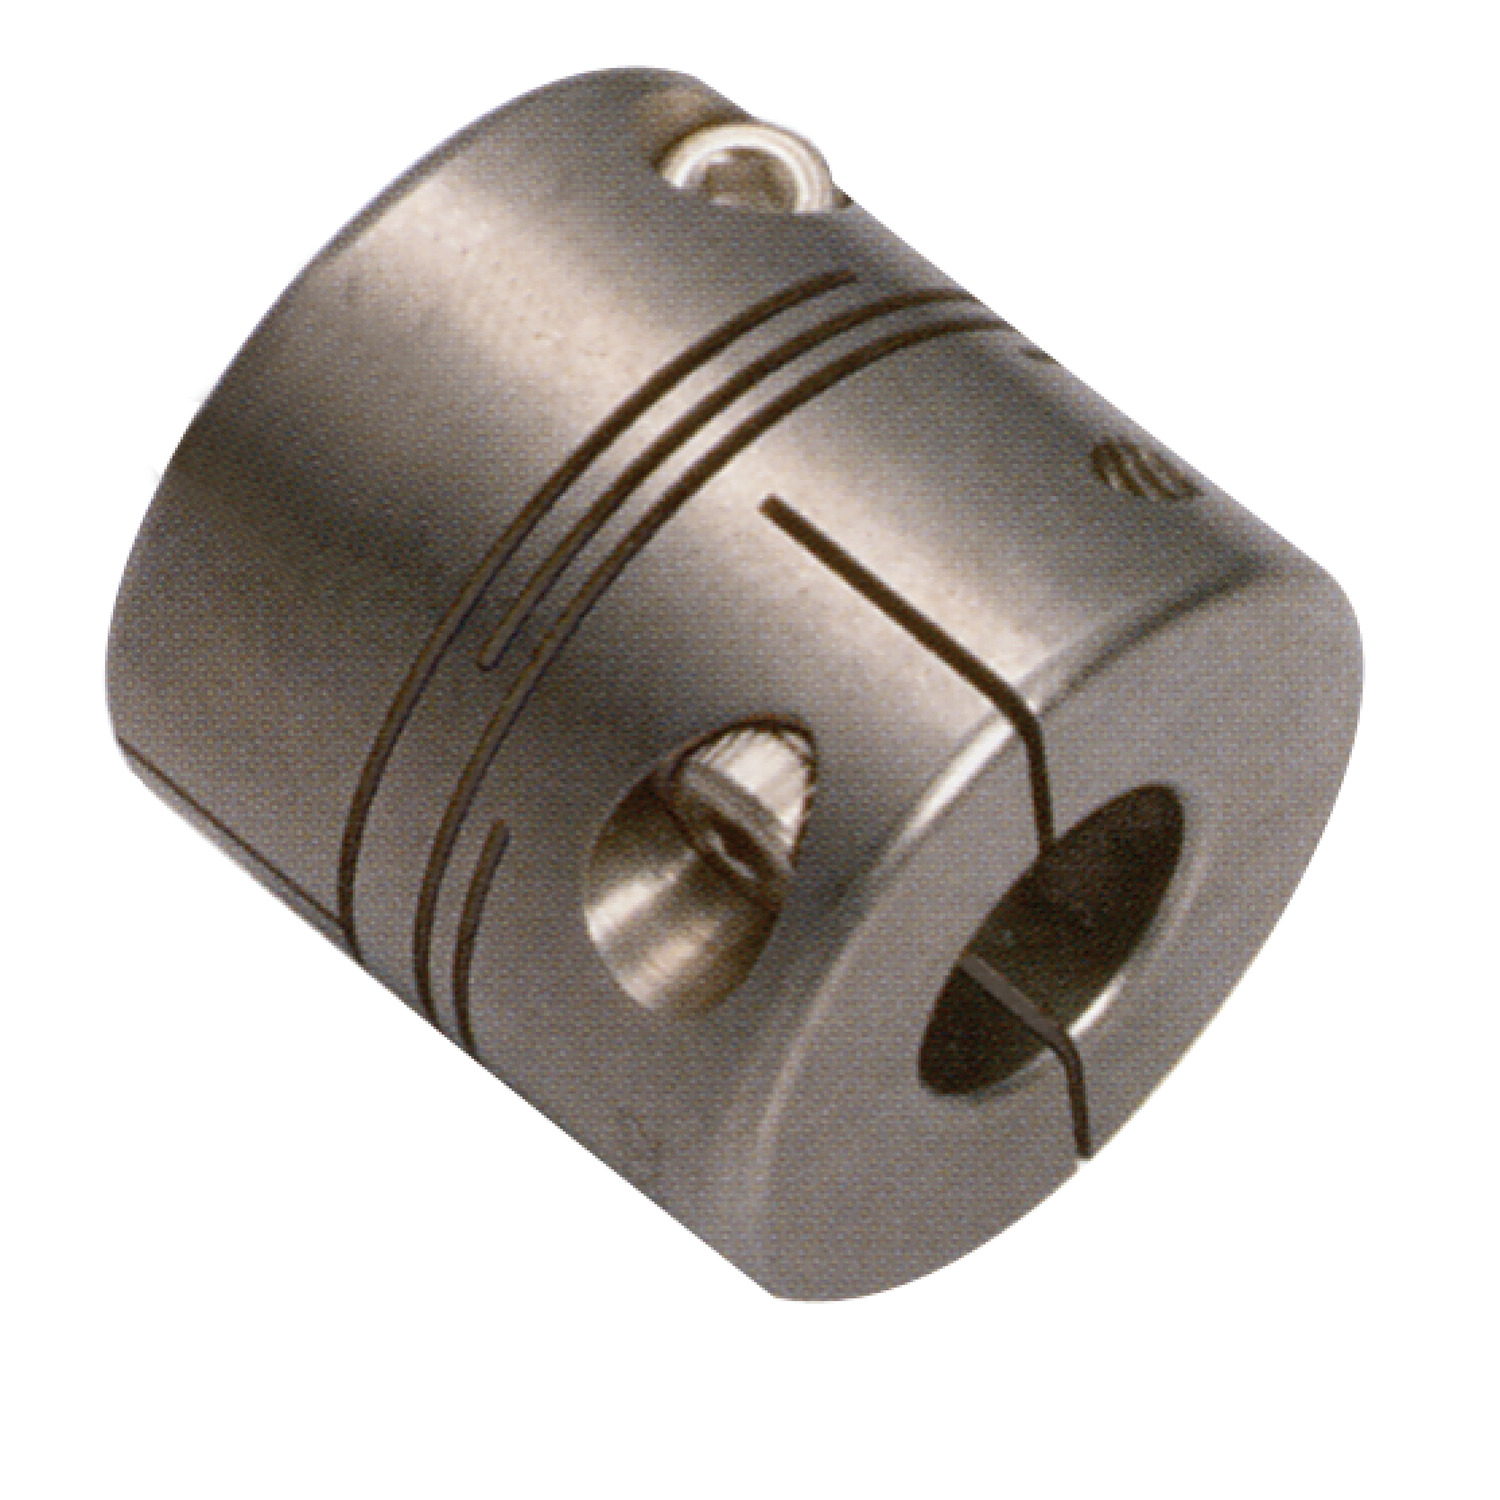 R3006.2 Spiral Beam Coupling - stainless steel